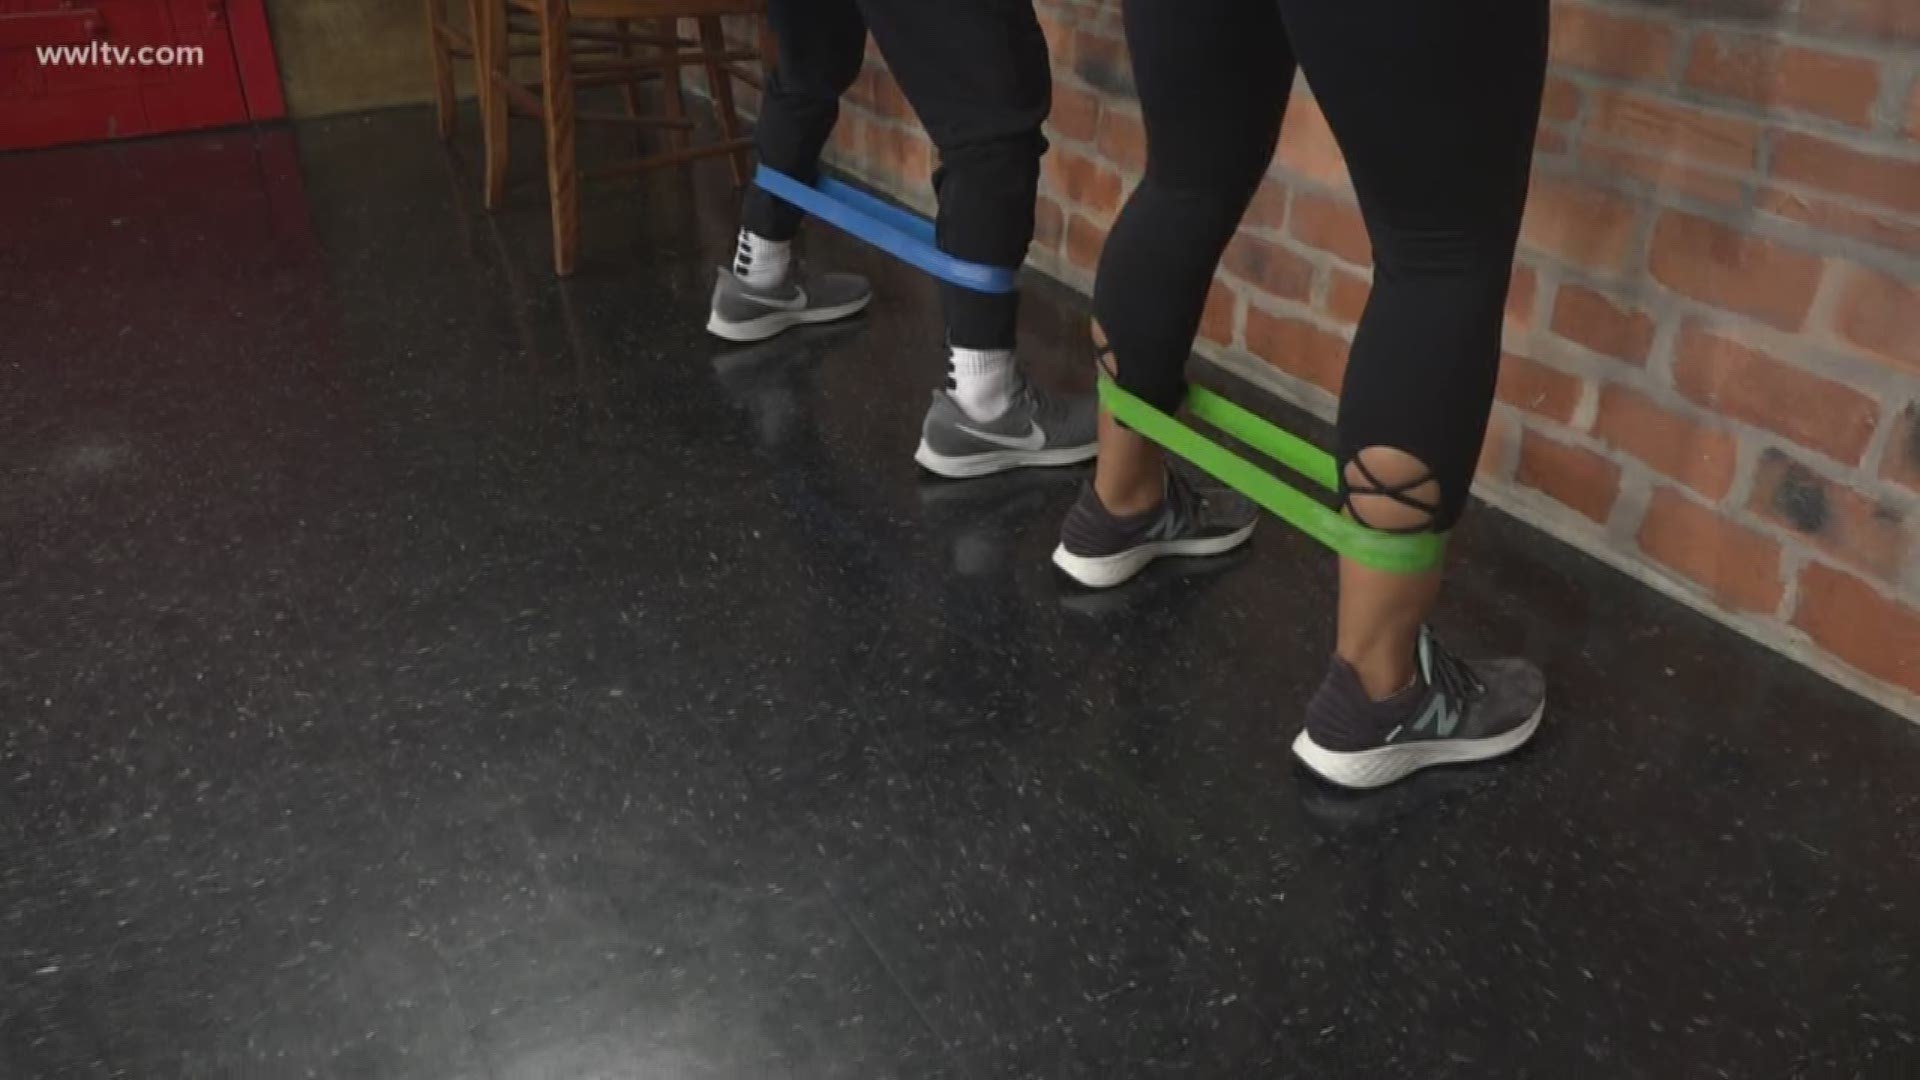 Mackie and April have two easy exercises for preventing Ankle Injuries.